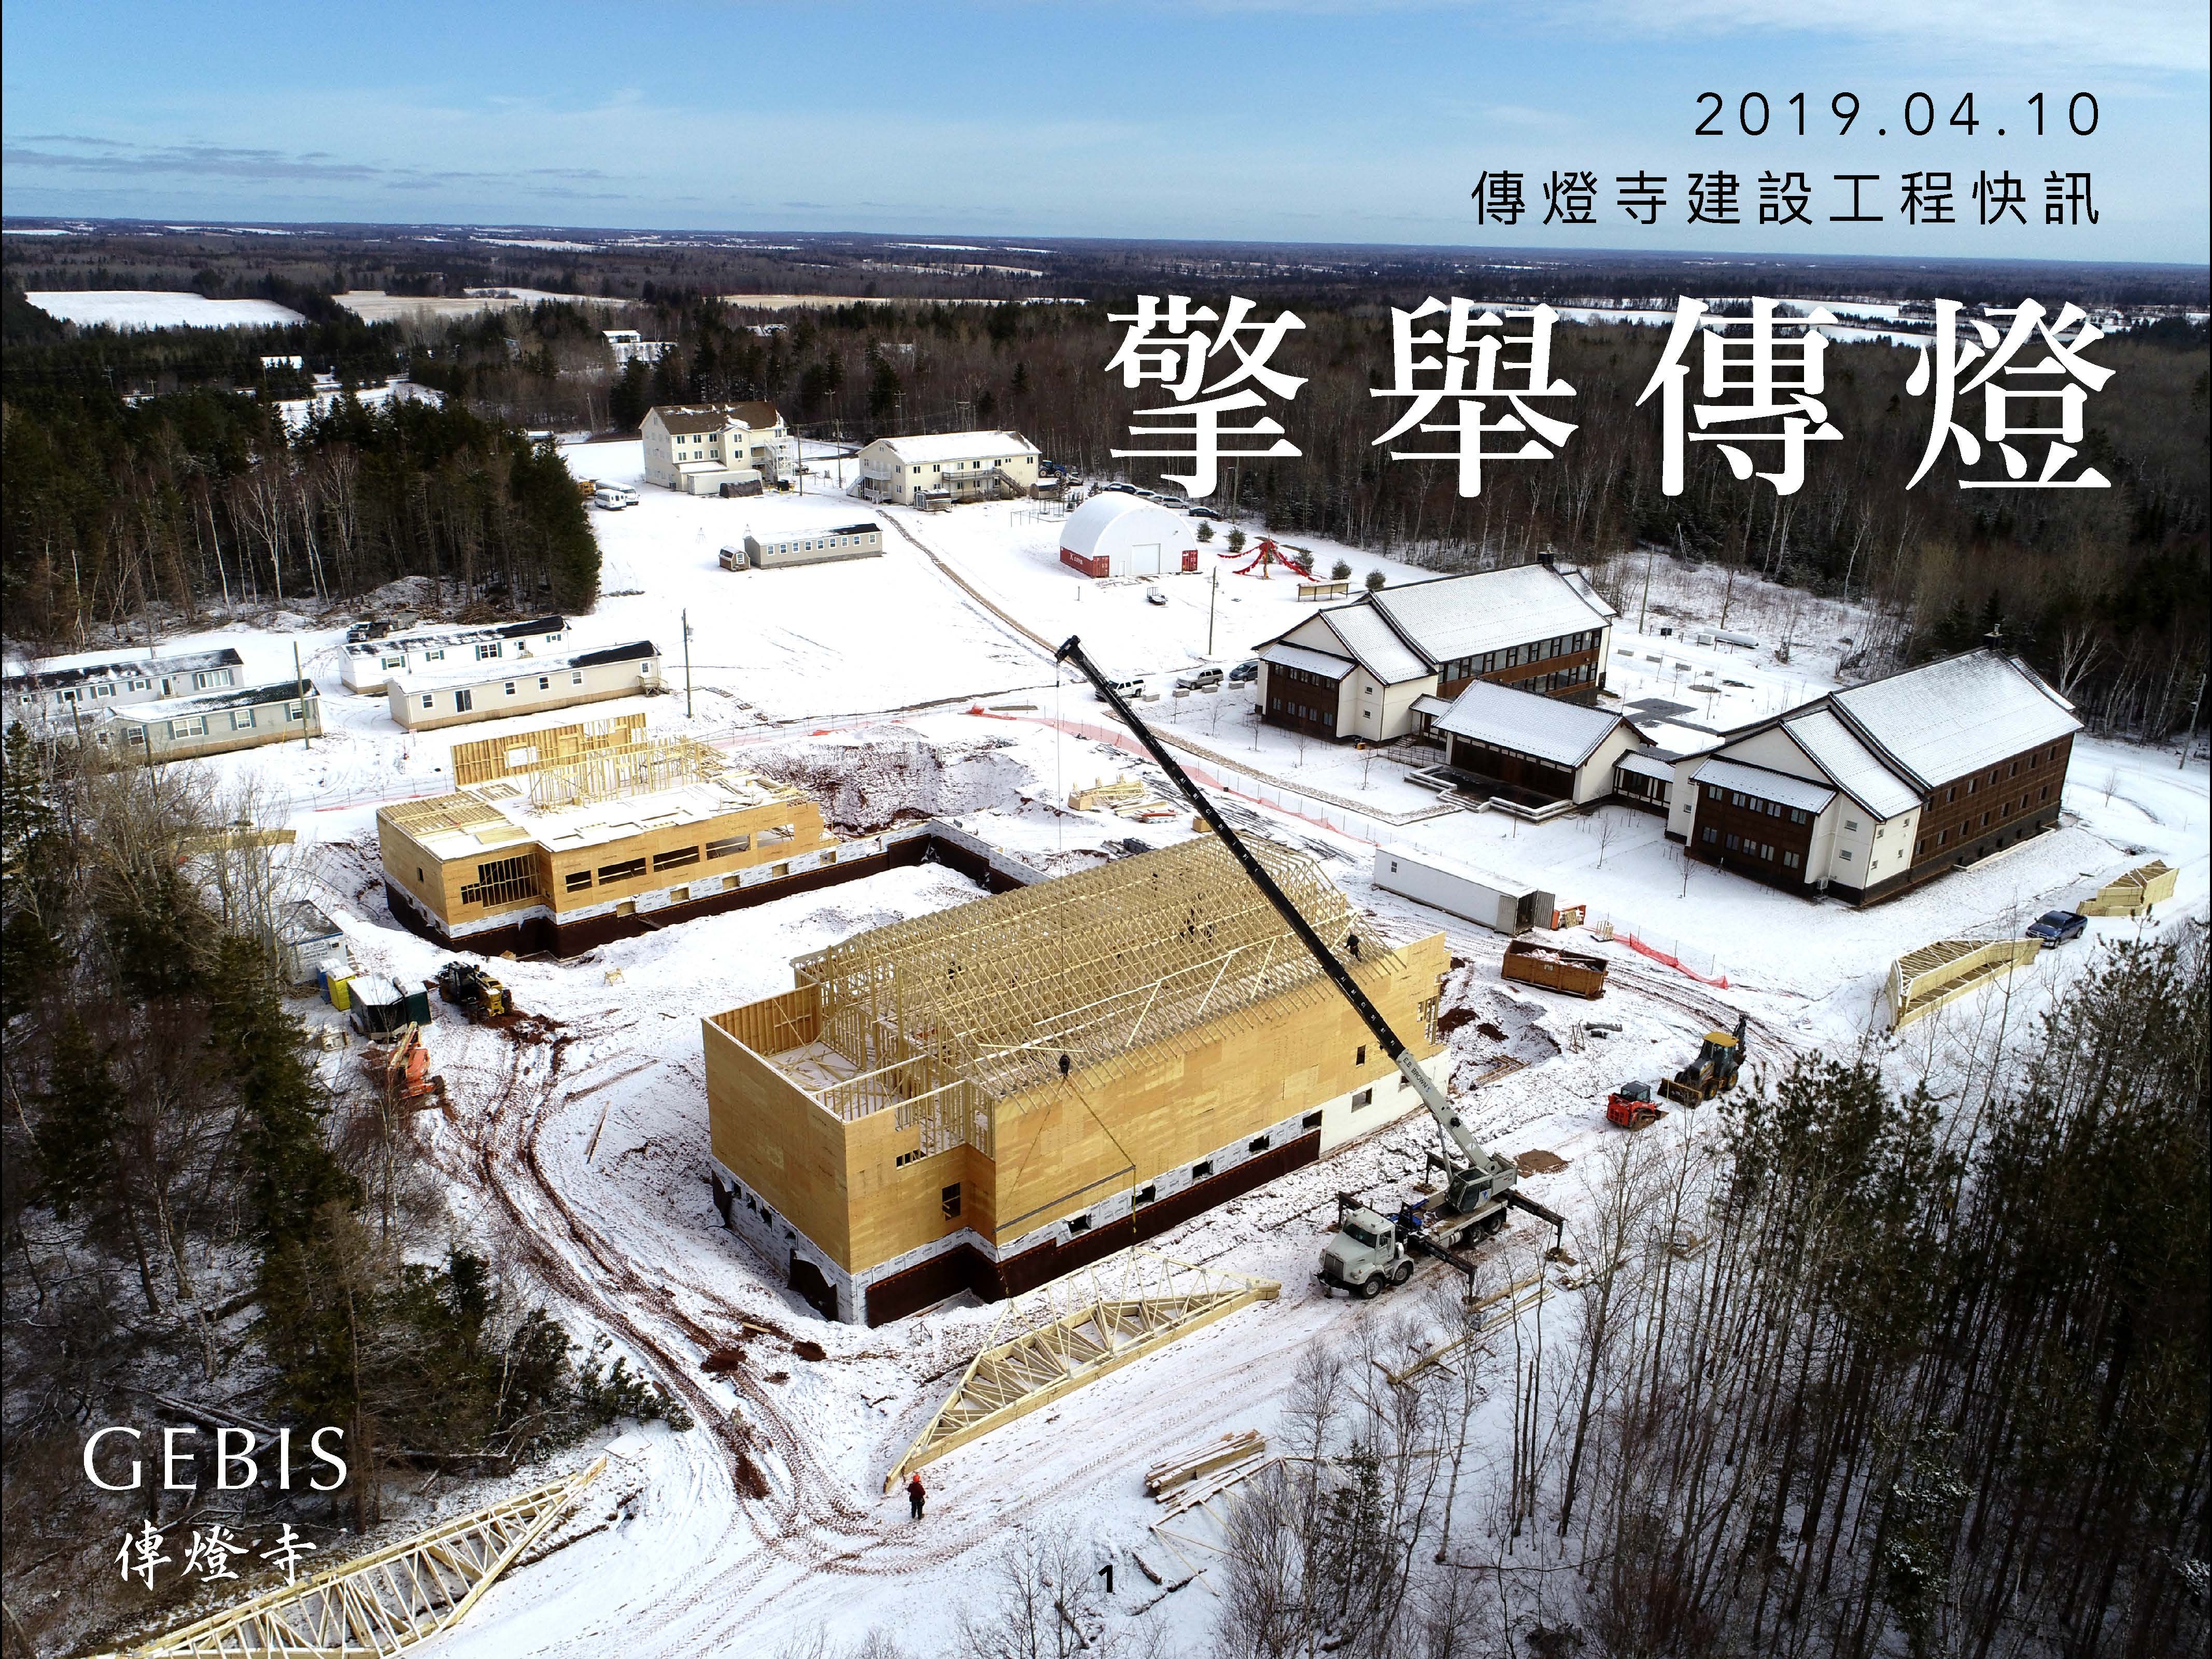 You are currently viewing 【擎舉傳燈】 ——傳燈寺建設工程快訊 2019.04.10